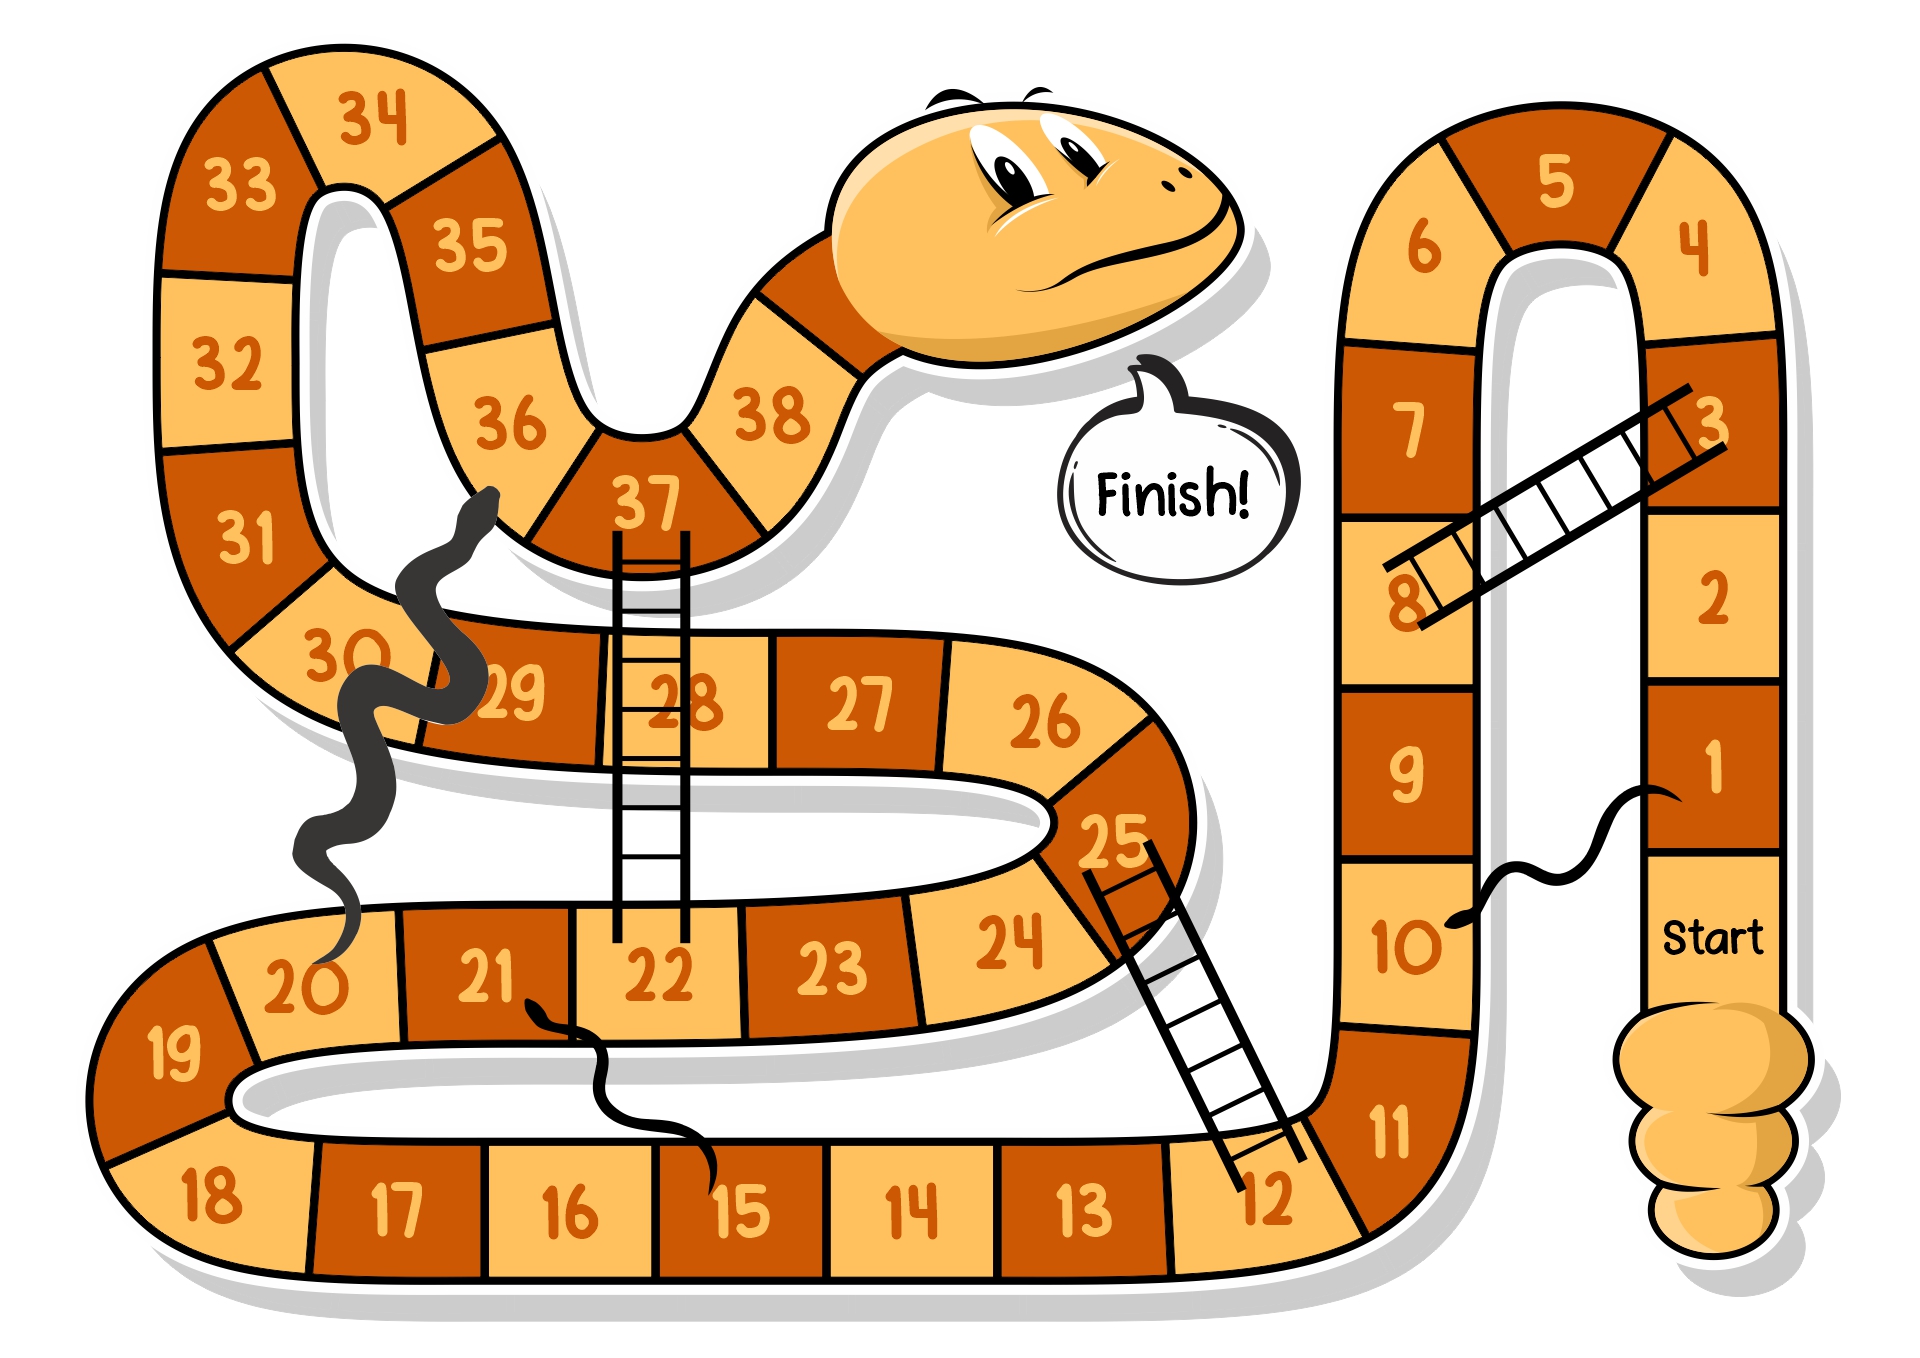 Snake Game Board Template Image